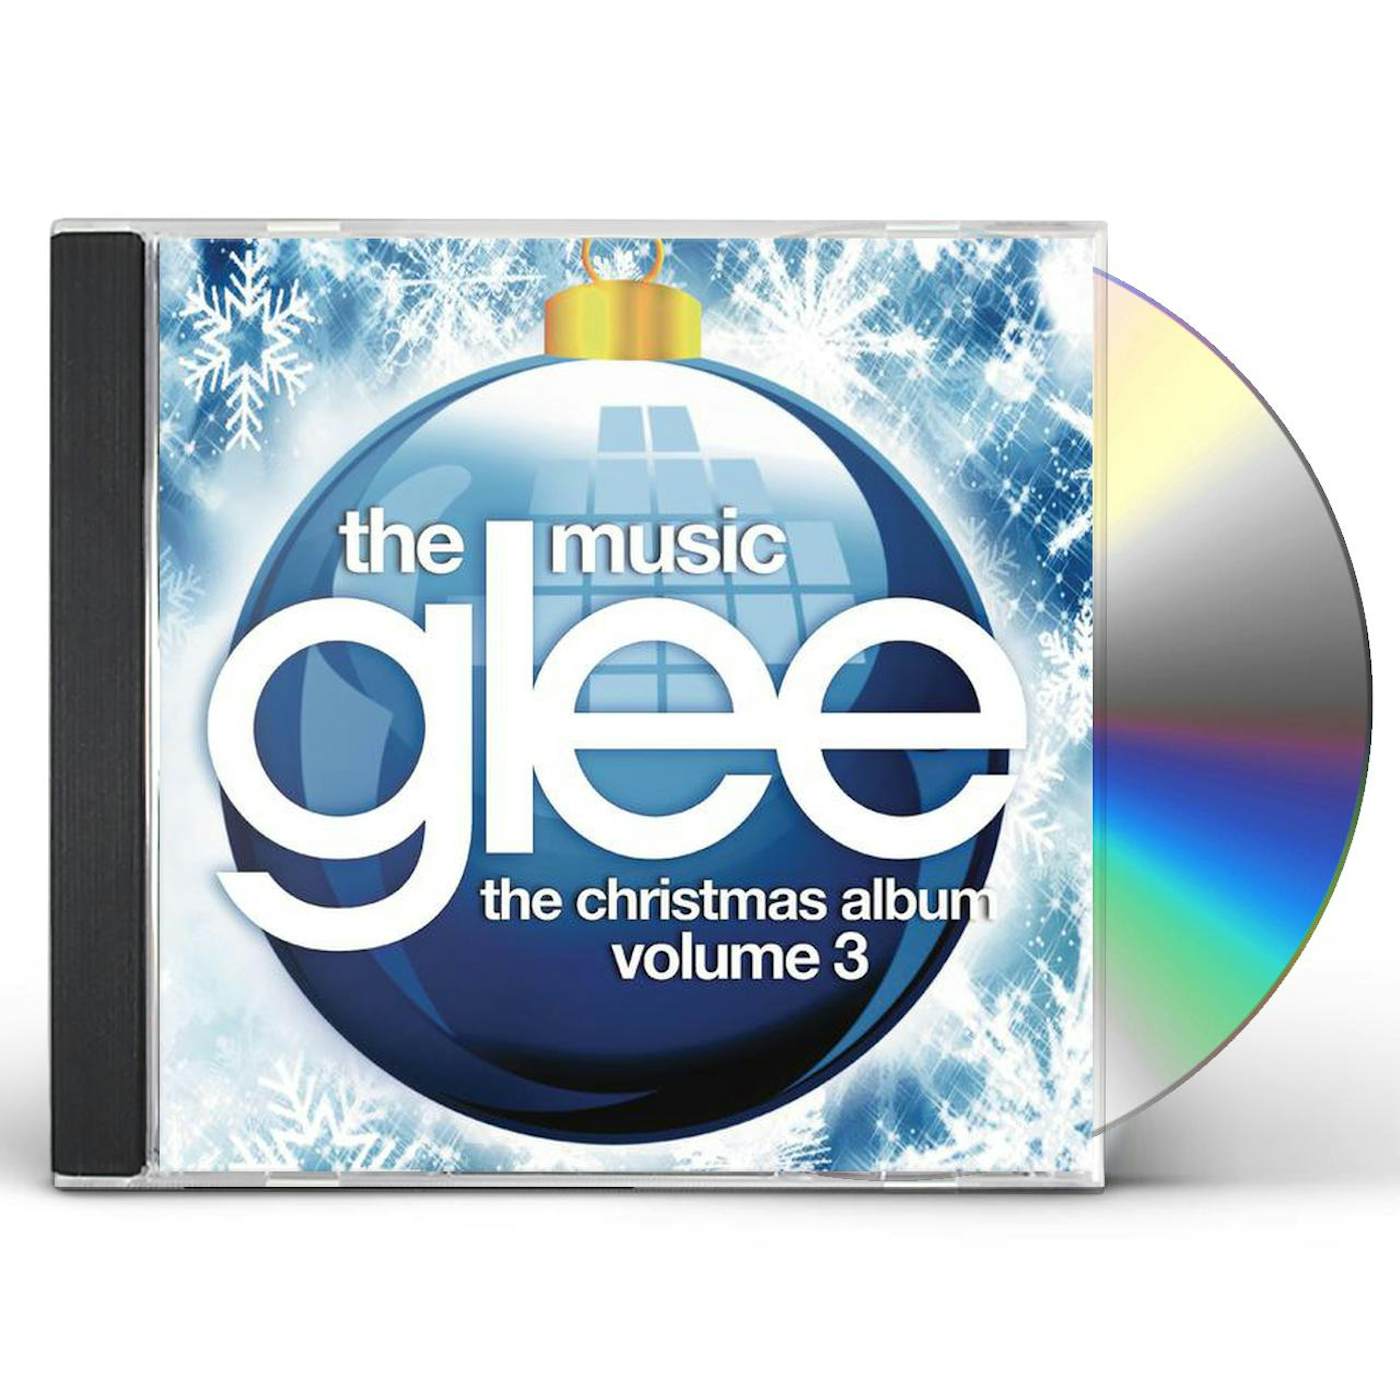 Glee Cast: Glee: The Music, Vol 1, Pop and rock